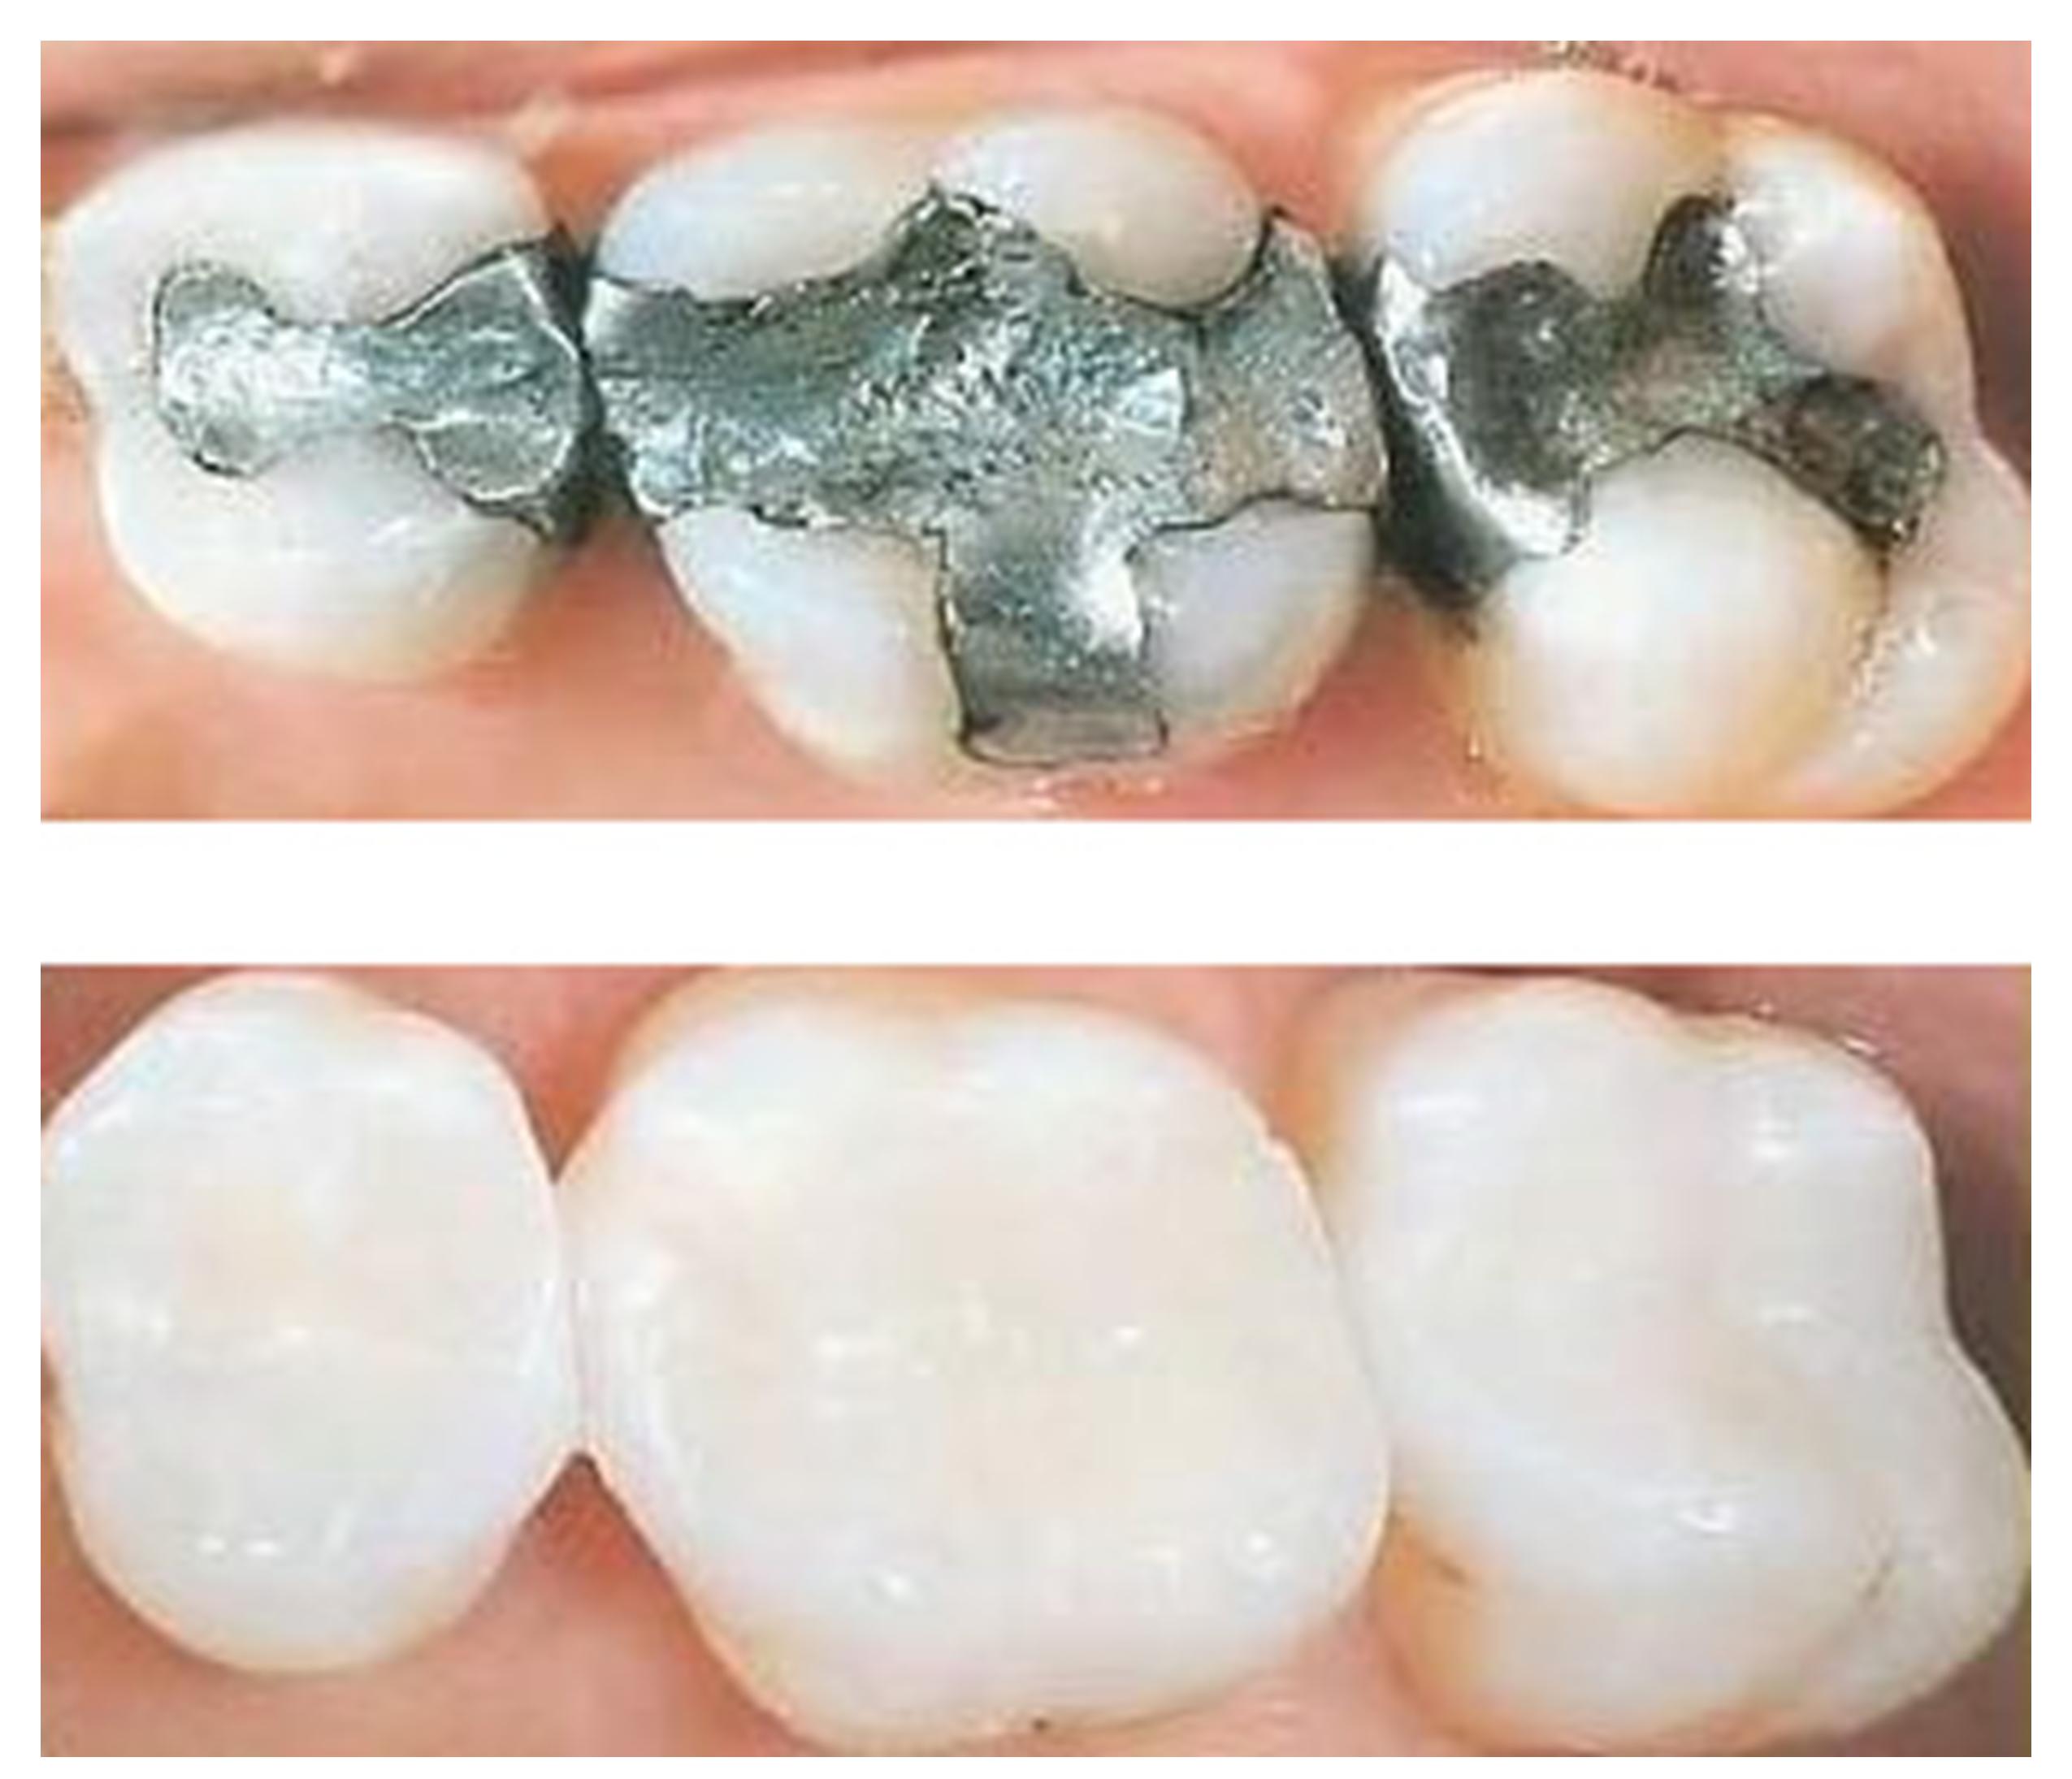 CEREC Tooth Crowns Are Now Offered by Cosmetic Dentist Dr. Irina Feldbein